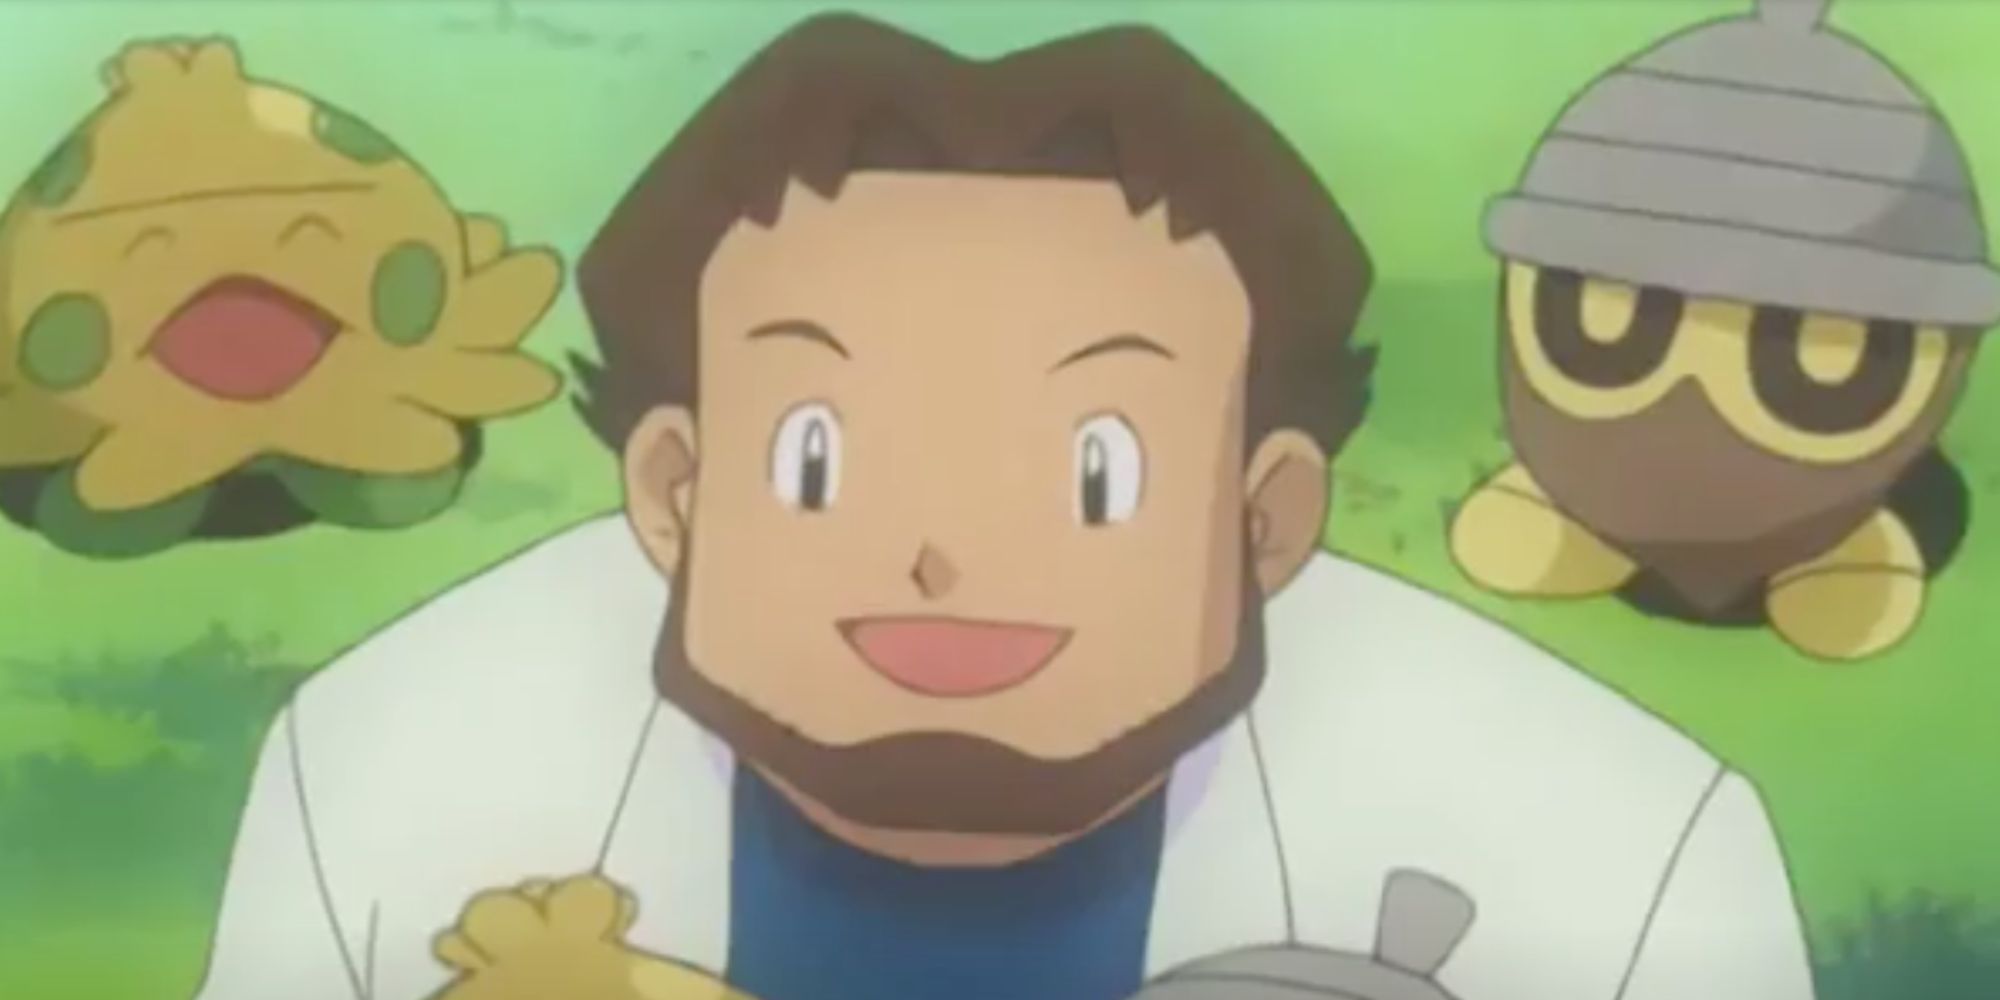 Professor Birch stands in front of a Seedot and Shroomish